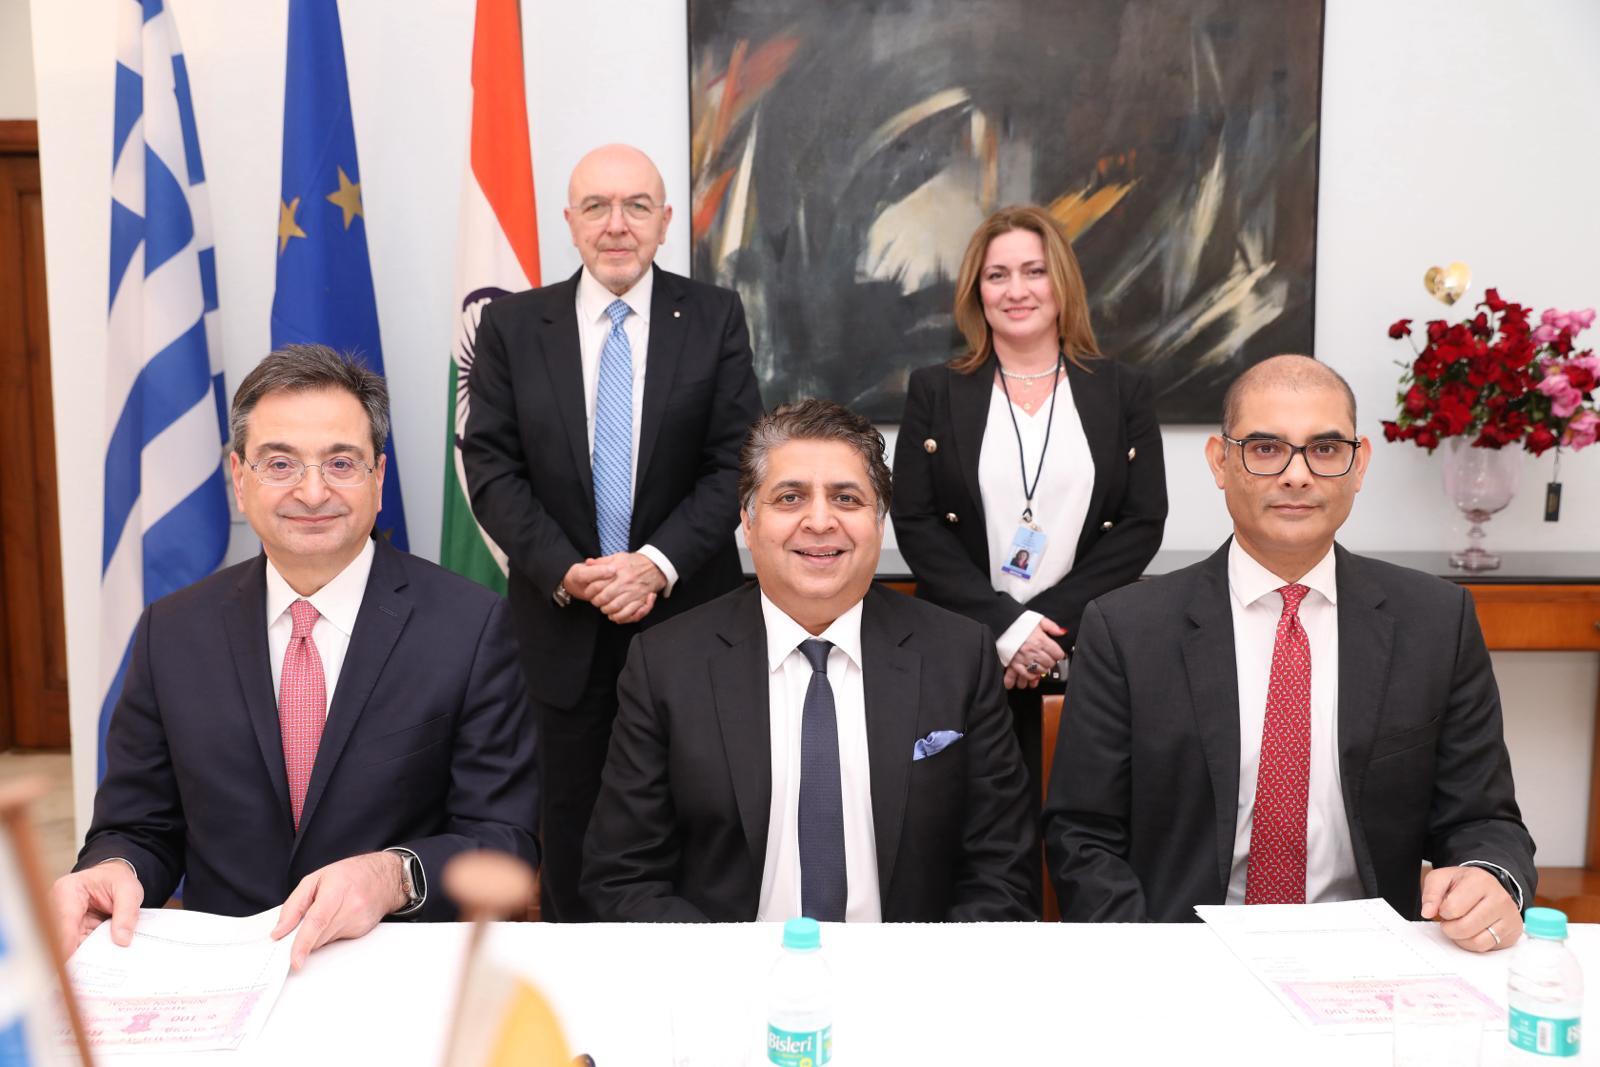 NPCI International and Eurobank Sign MoU in View of Forming a Strategic Alliance on Foreign Inward Remittances